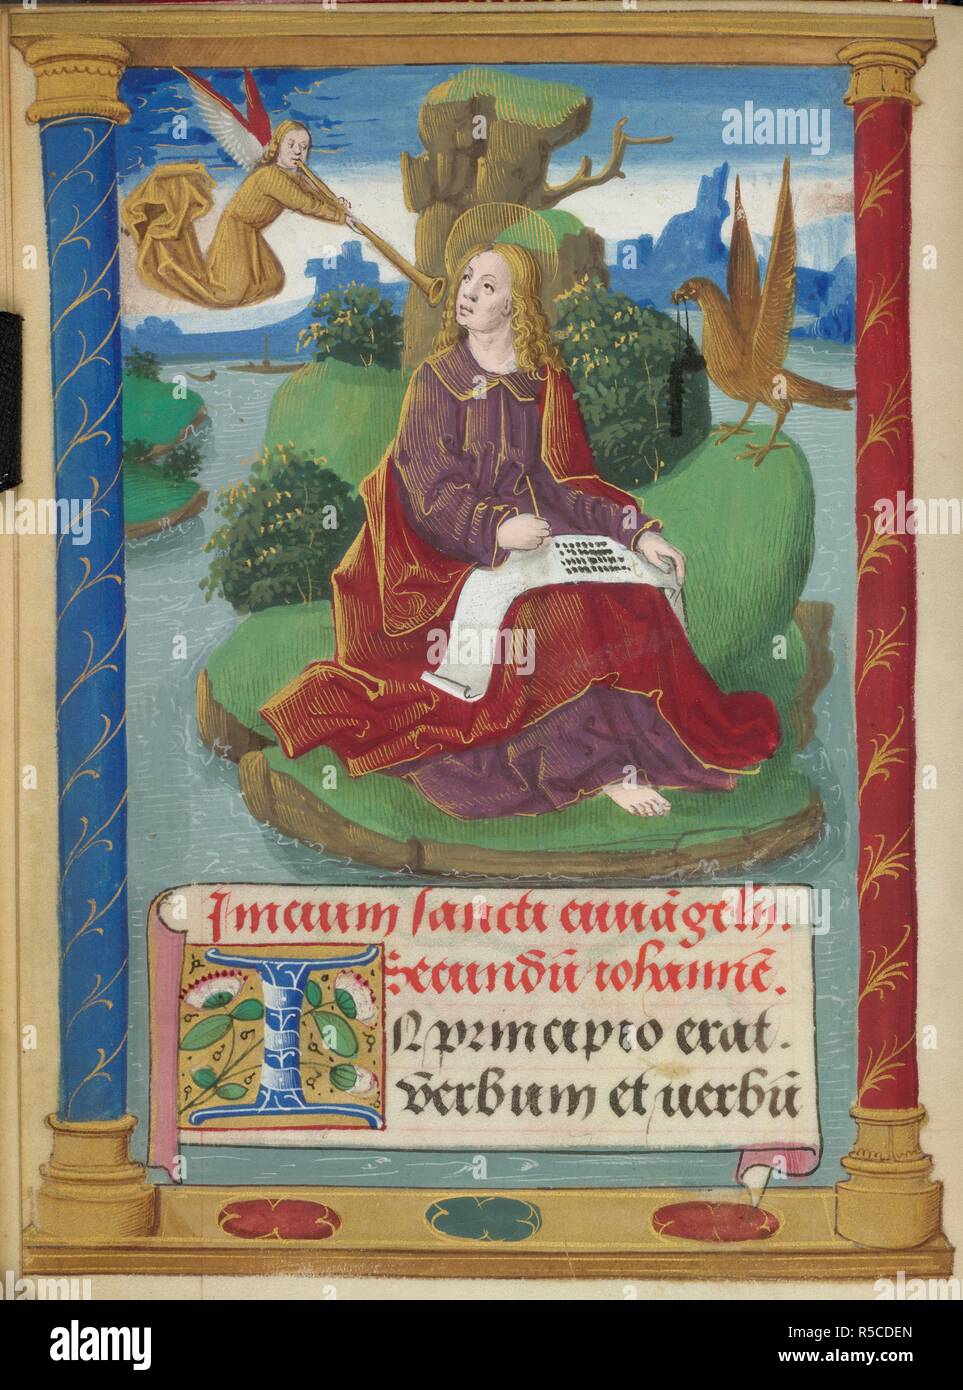 St John writing his gospel. Book of Hours. France; circa 1500. [Whole folio] Gospel readings. St John seated in a landscape, writing his gospel, with his symbol, the eagle, and an angel blowing a trumpet. Below, John 1, 1, beginning with decorated initial 'I'  Image taken from Book of Hours.  Originally published/produced in France; circa 1500. . Source: Sloane 2419, f.8v. Language: Latin. Stock Photo